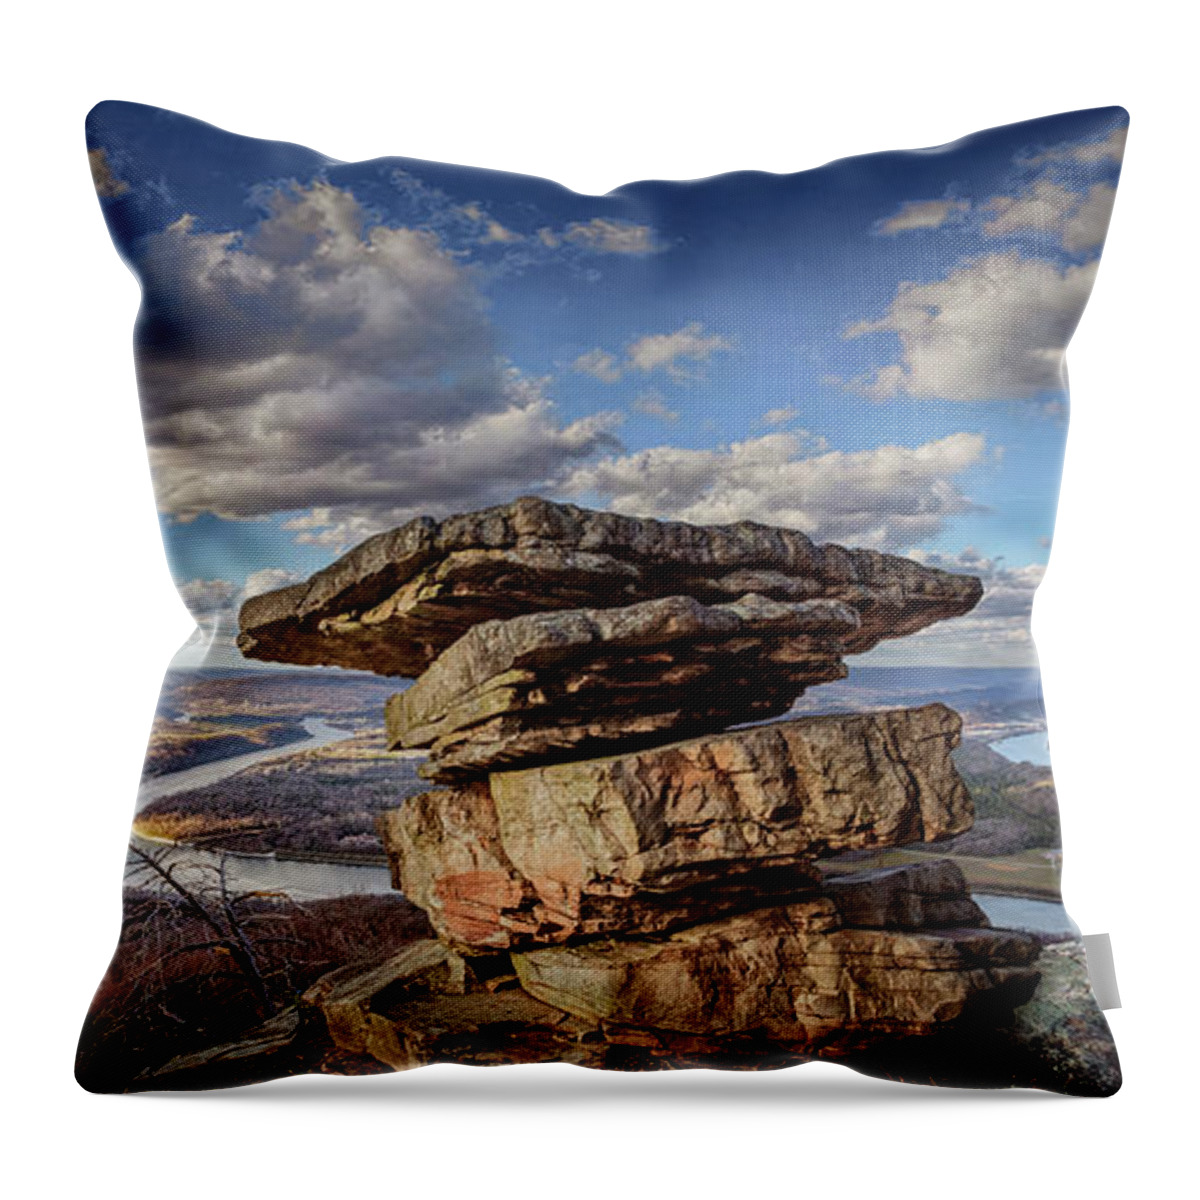 Moccasin Bend Throw Pillow featuring the photograph Umbrella Rock Overlooking Moccasin Bend by Steven Llorca